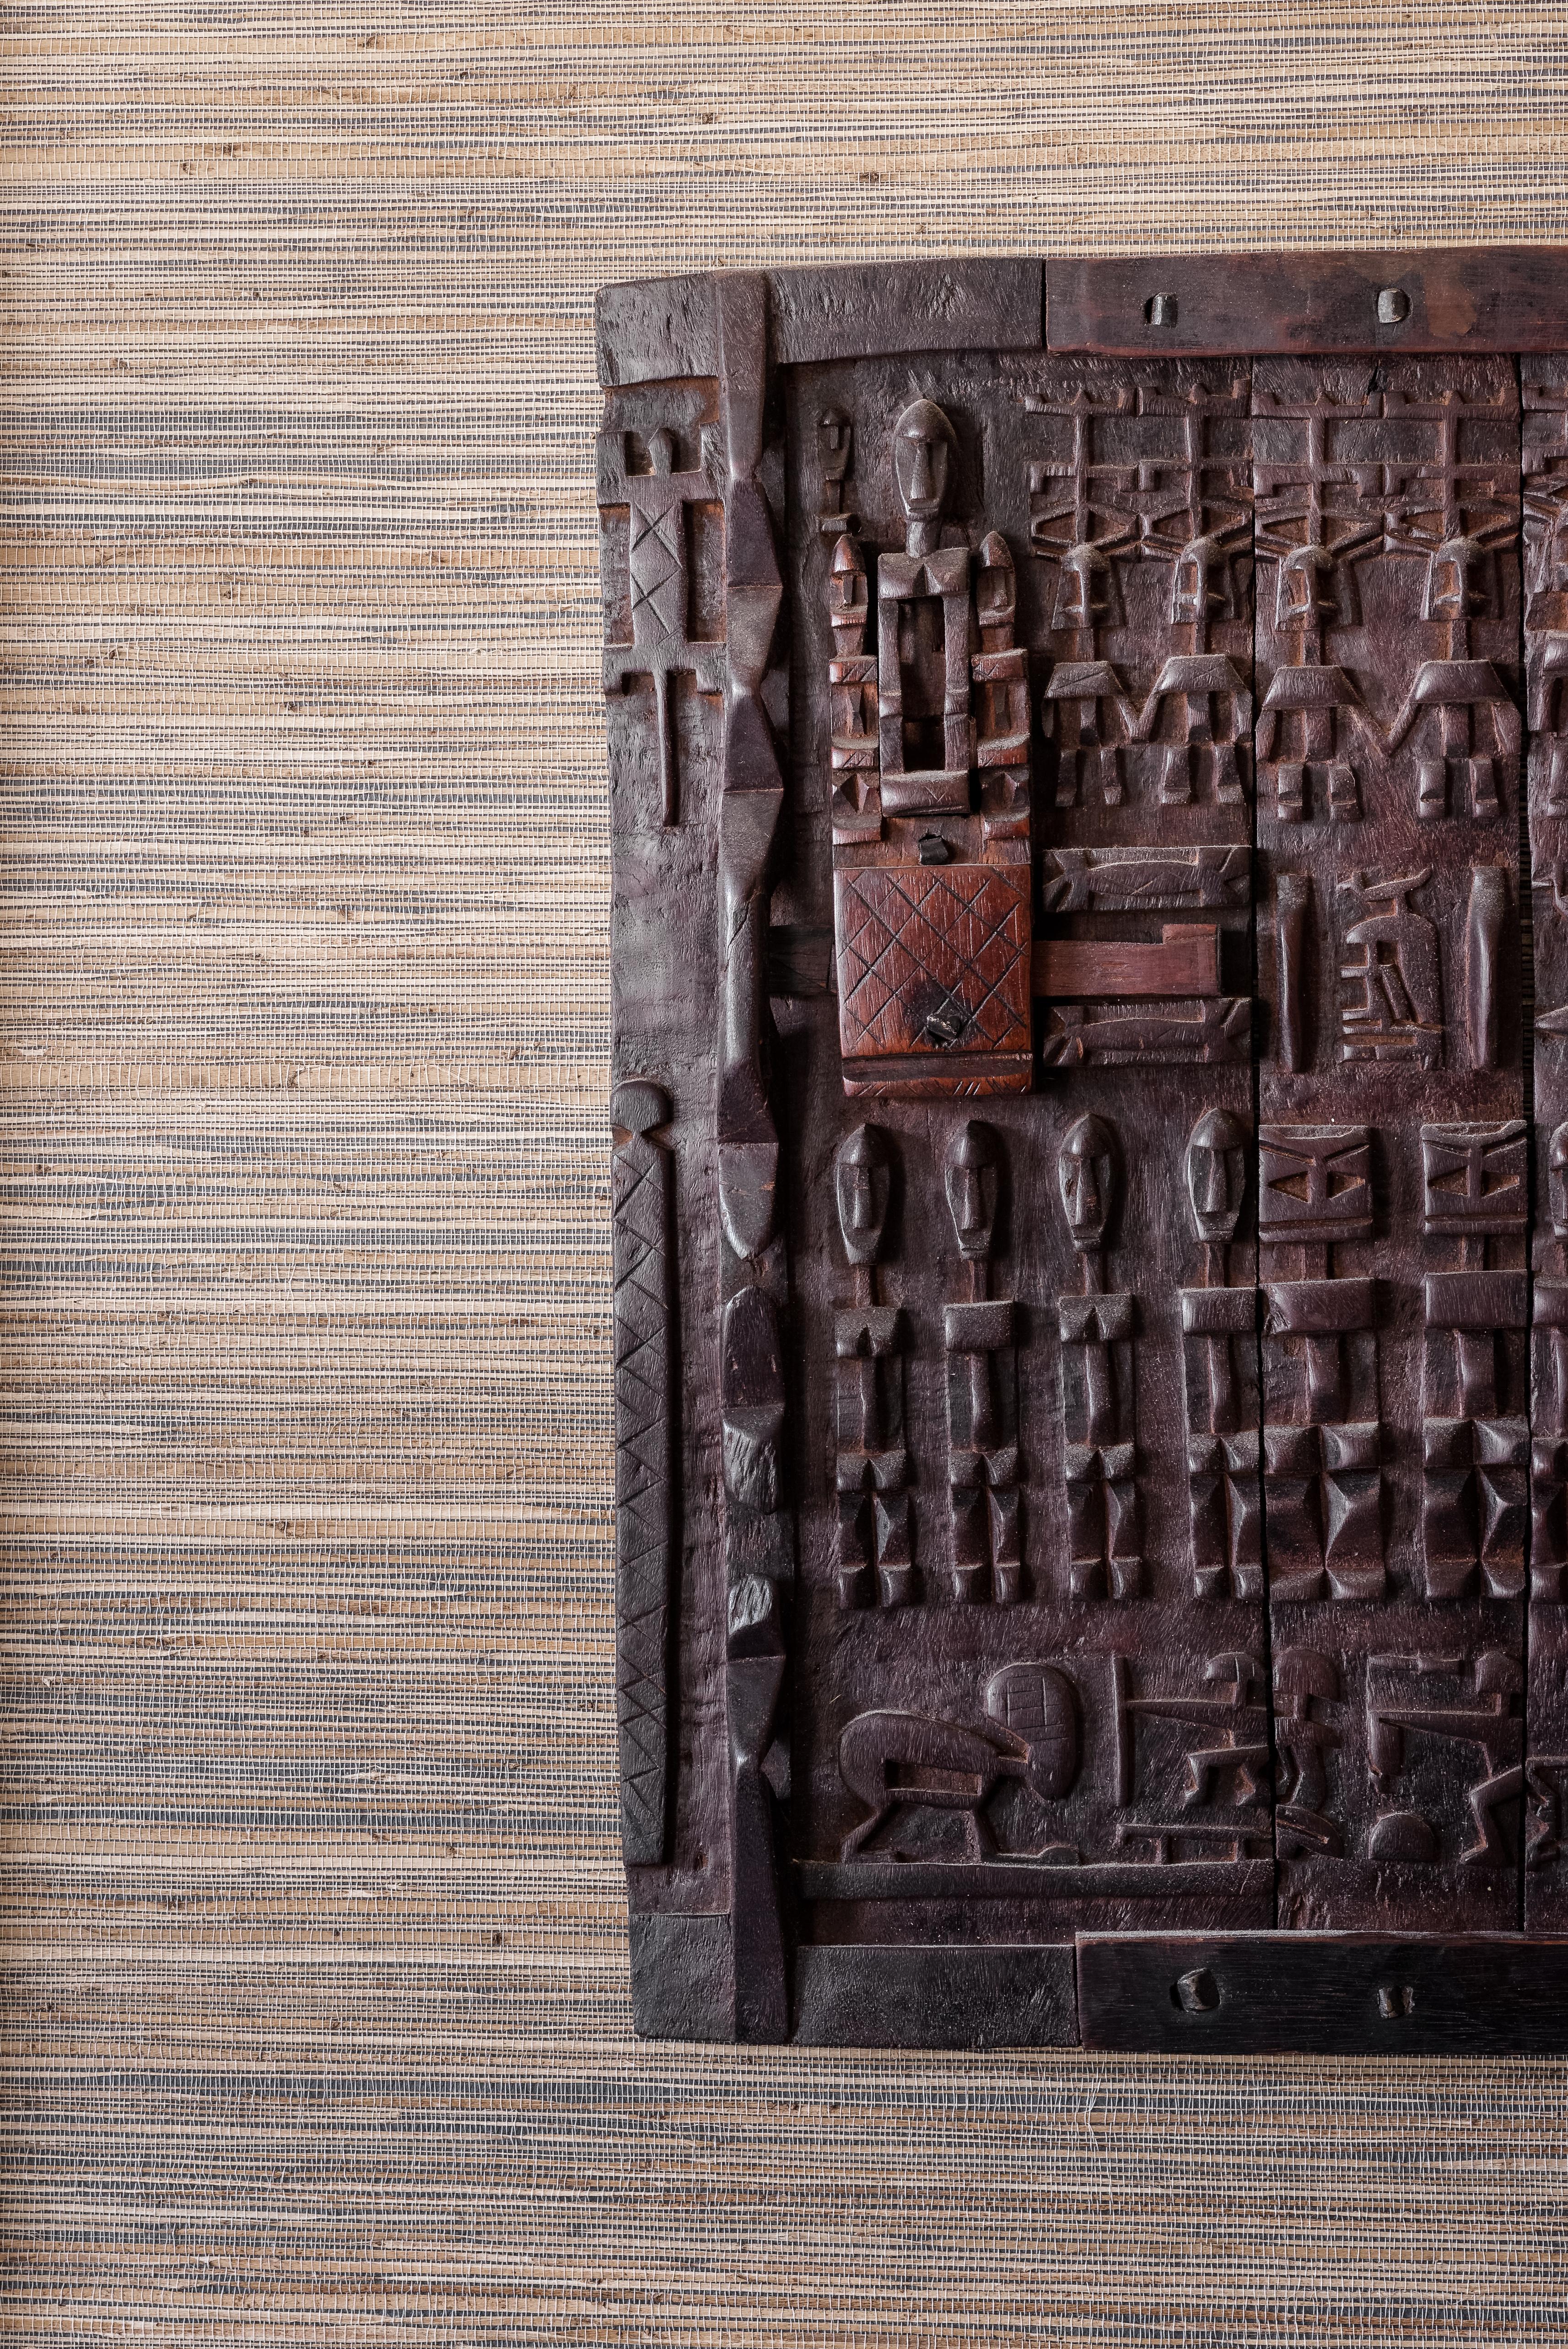 20th century tribal hardwood Dogon window panel
The Dogon tribe is one of Africa's most fascinating tribes, but also a vanishing one.
Located in the region of Mali, in West Africa, south of the Niger Bend, they've been living there since the 15th